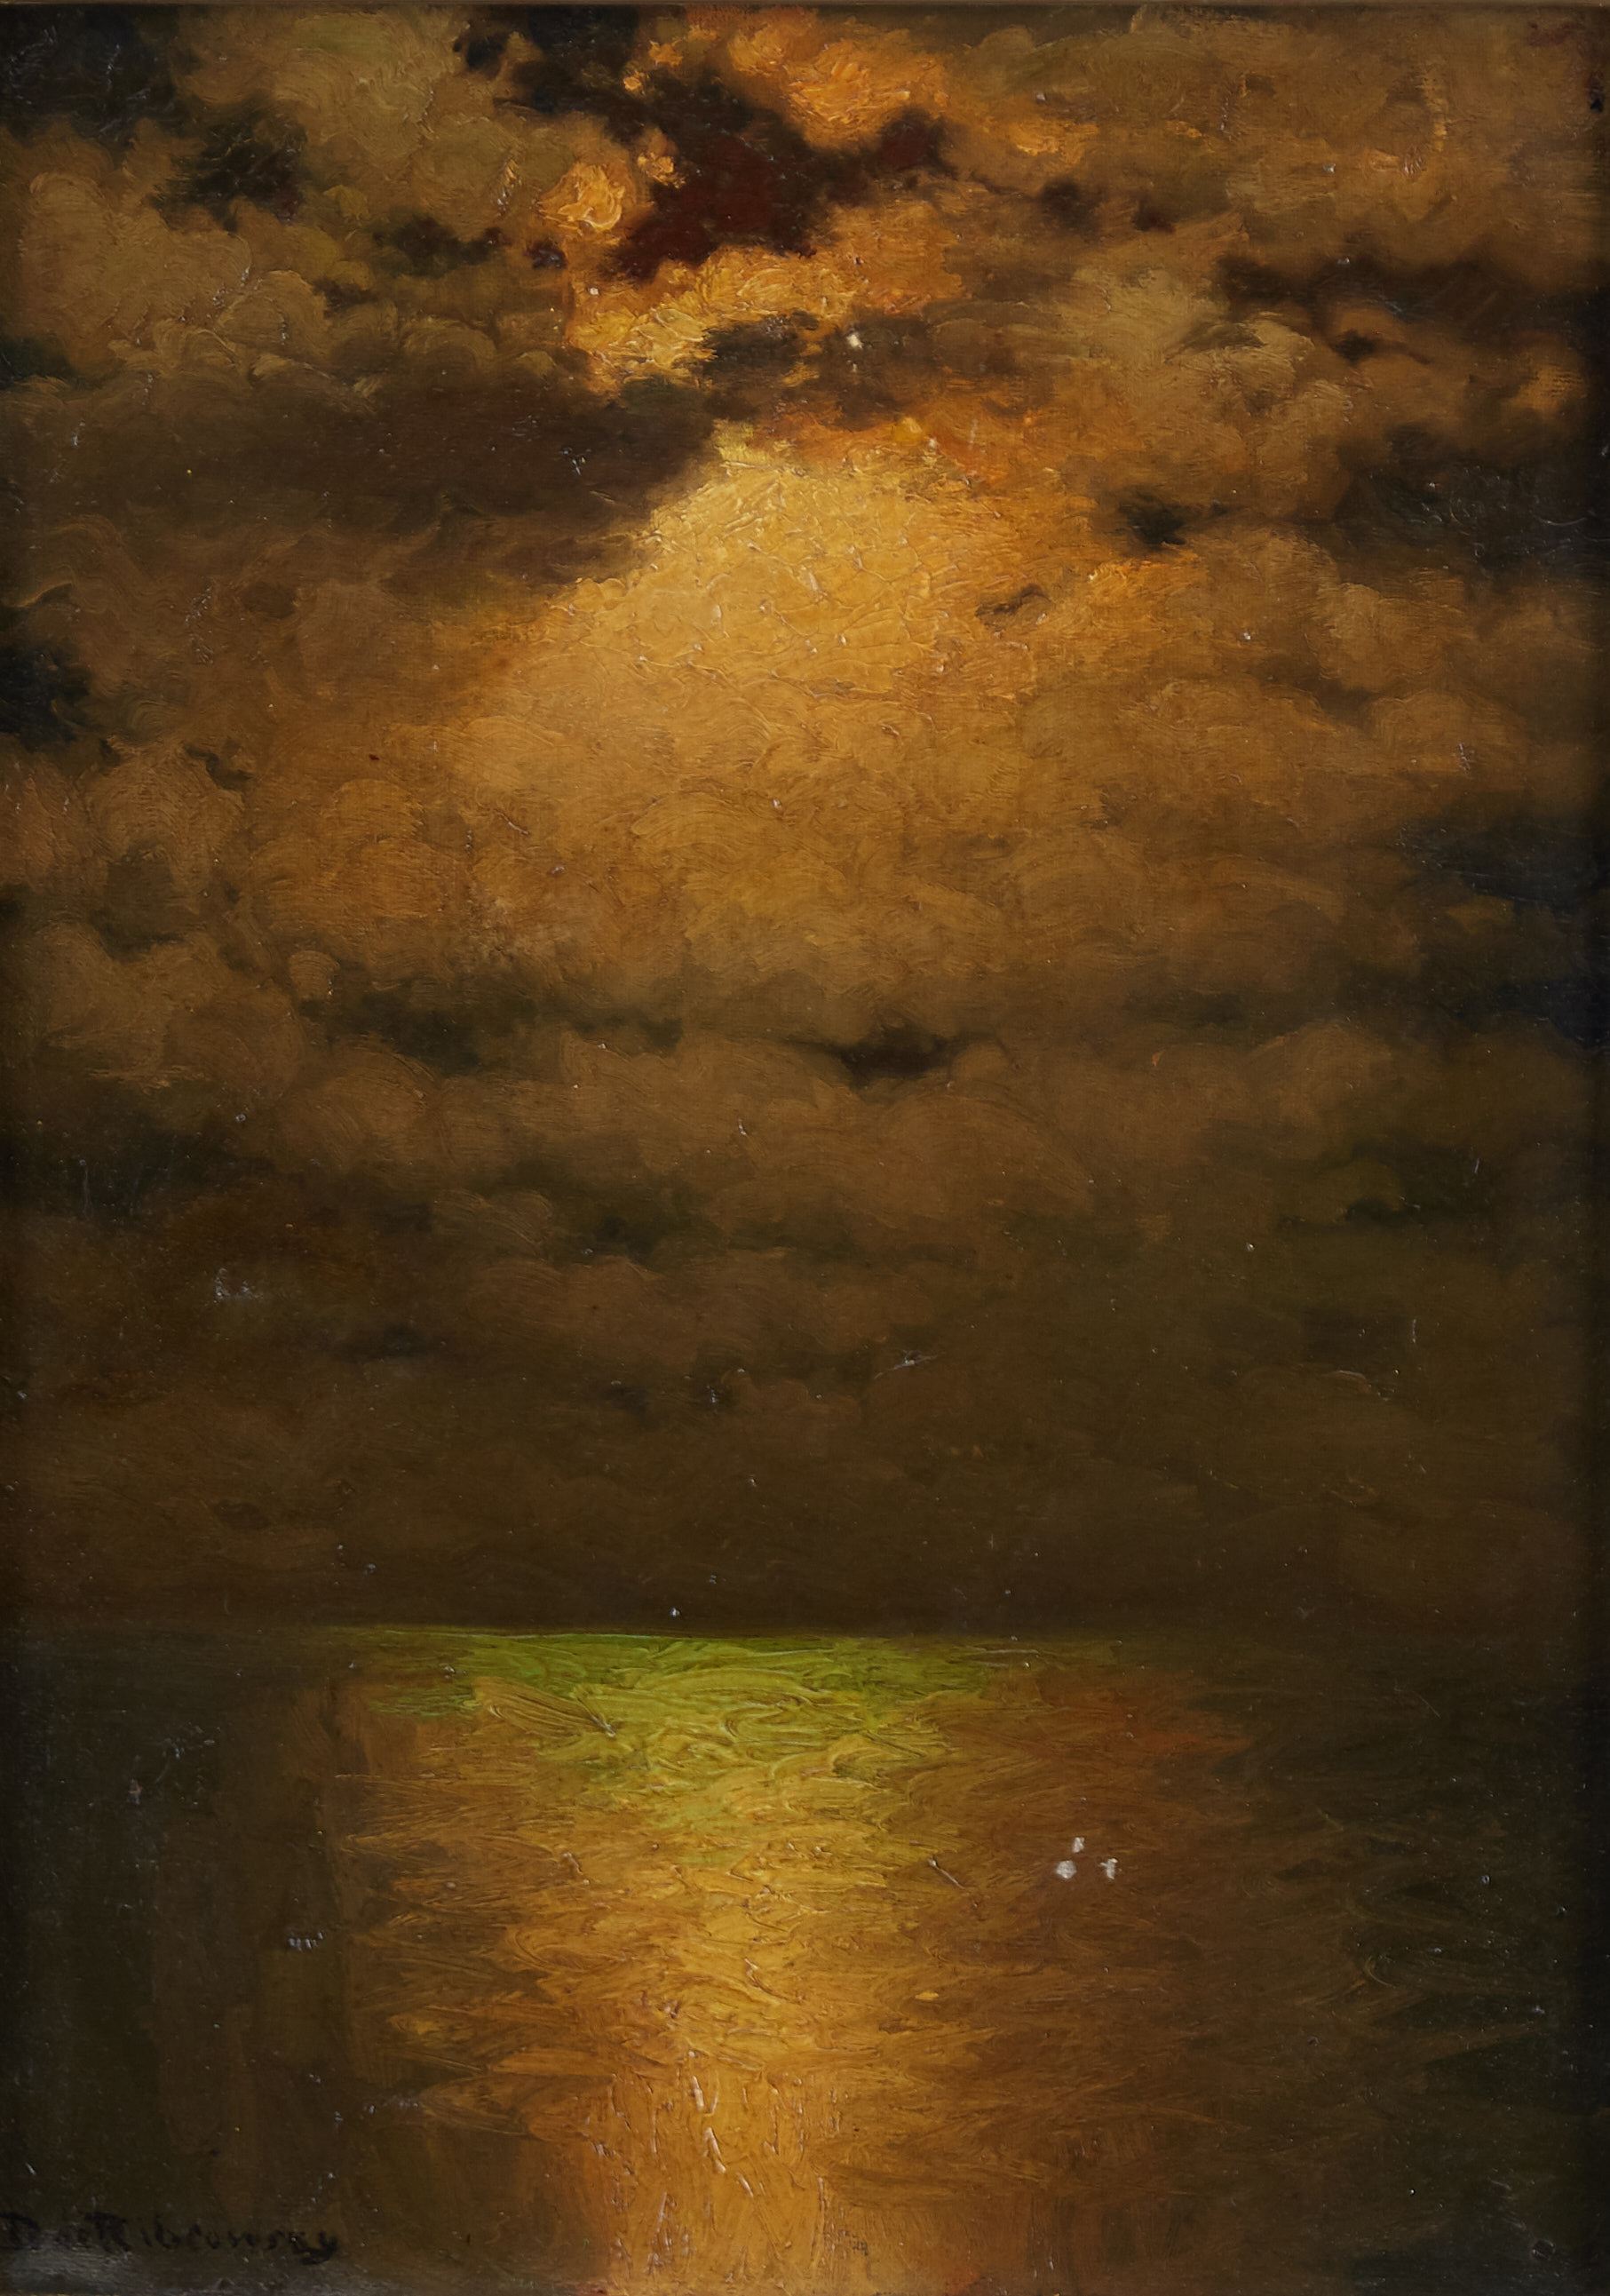 Lot 061: Ribcowsky "Nocturne" Oil on Canvas